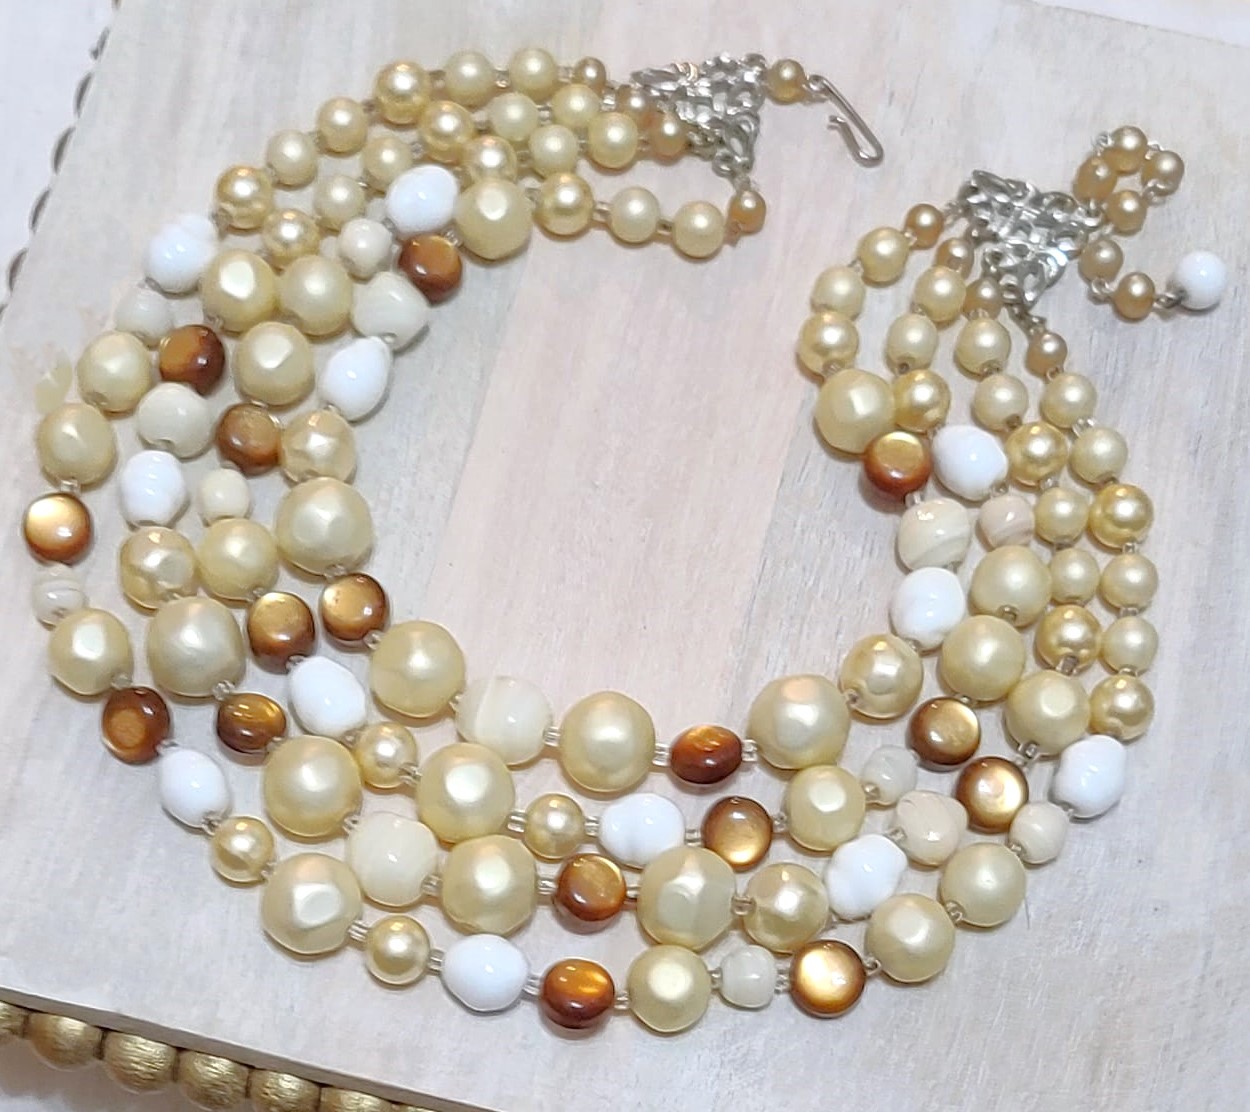 Pearls and moonglow beads 4 strand vintage necklace